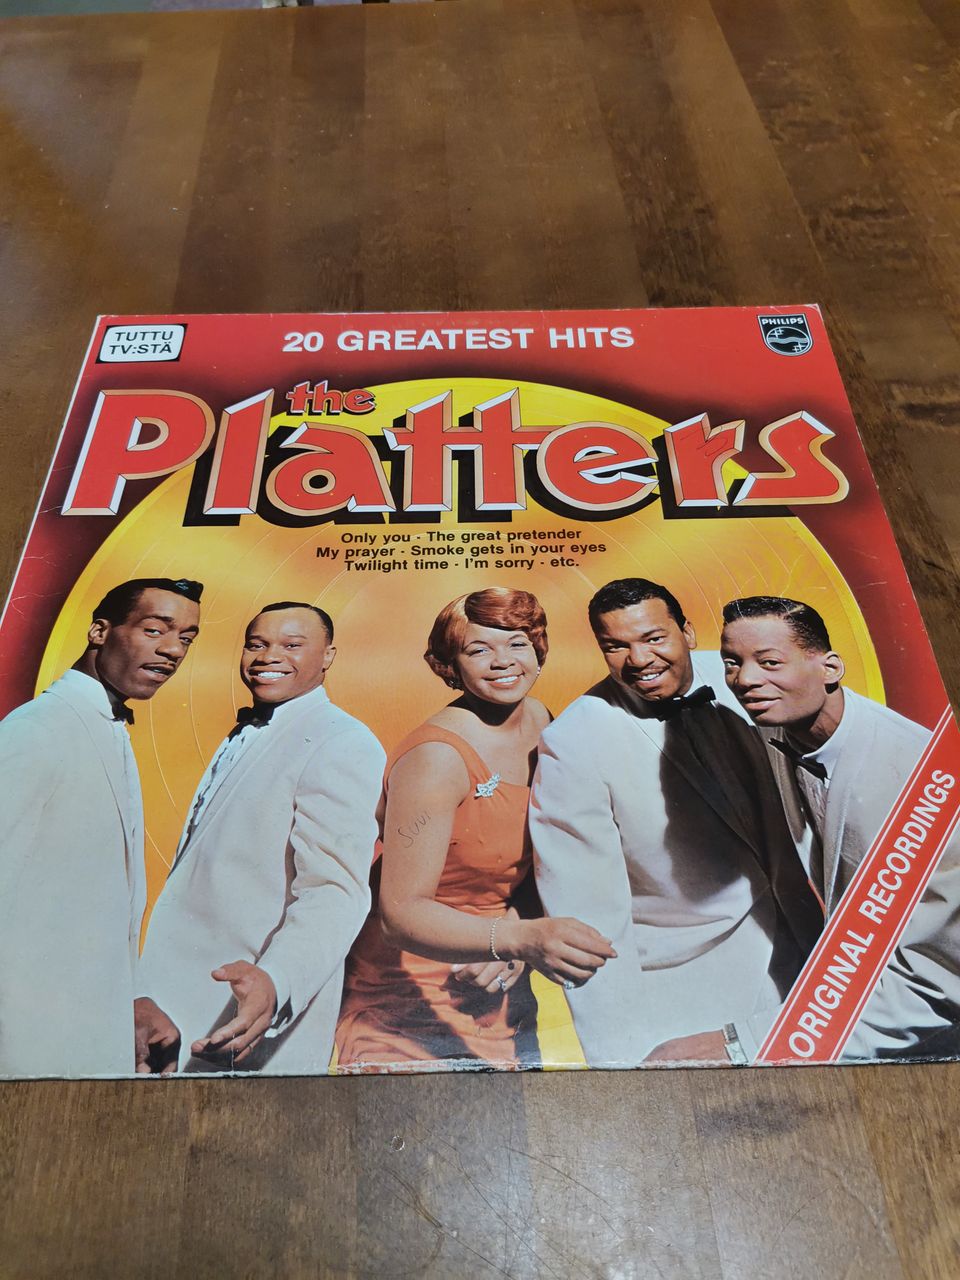 The Platters 20 greatest hits